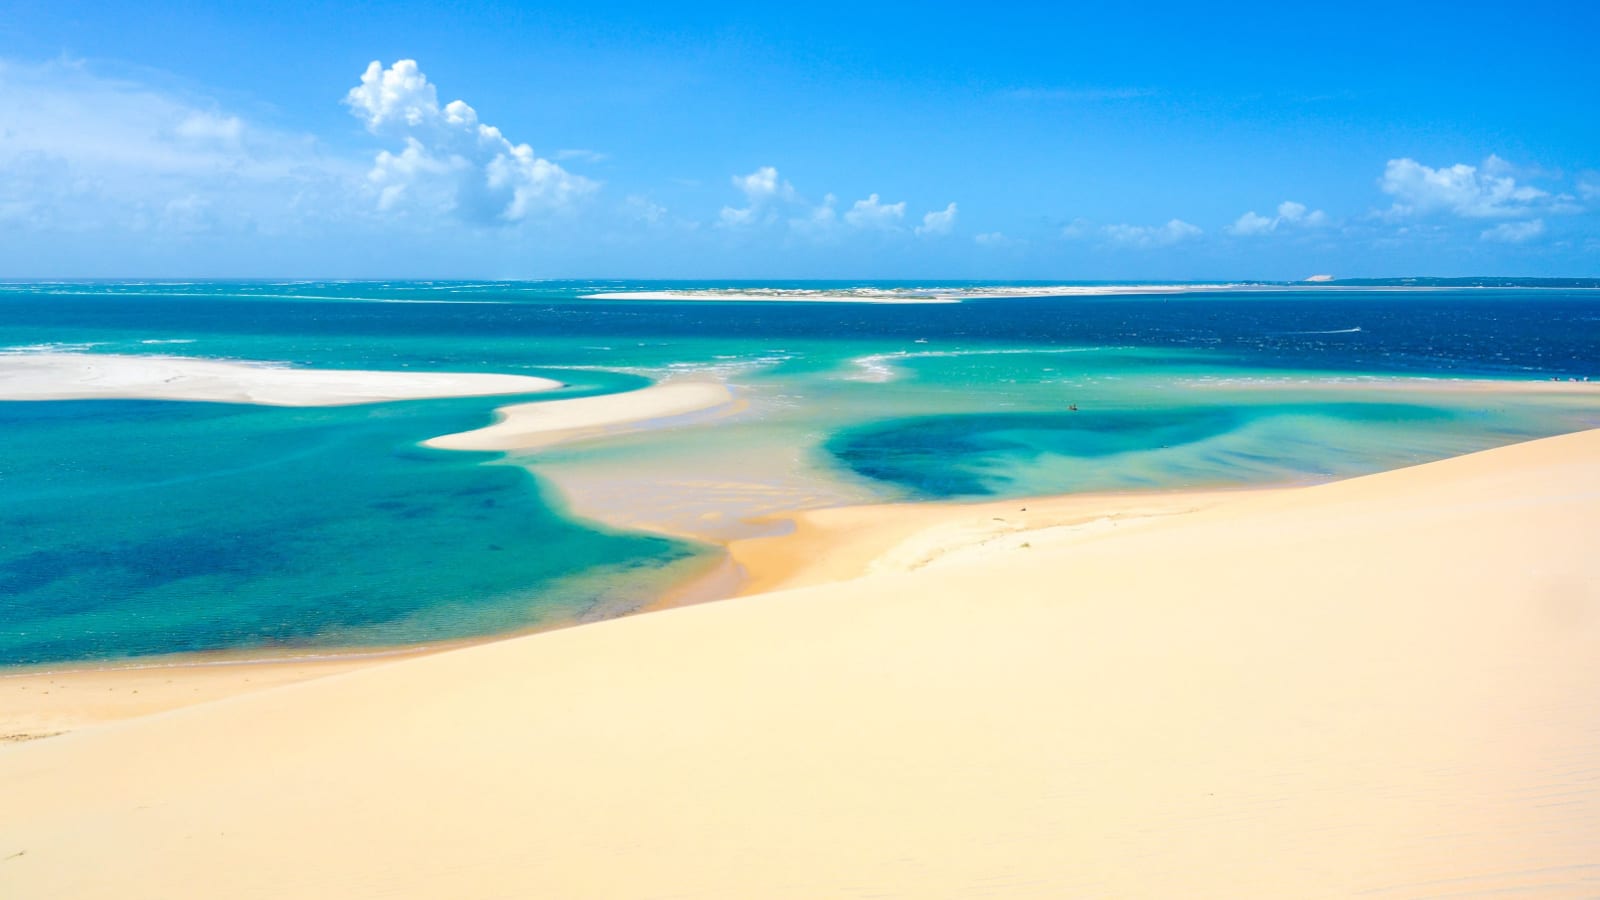 Sand dunes and beaches in Mozambique